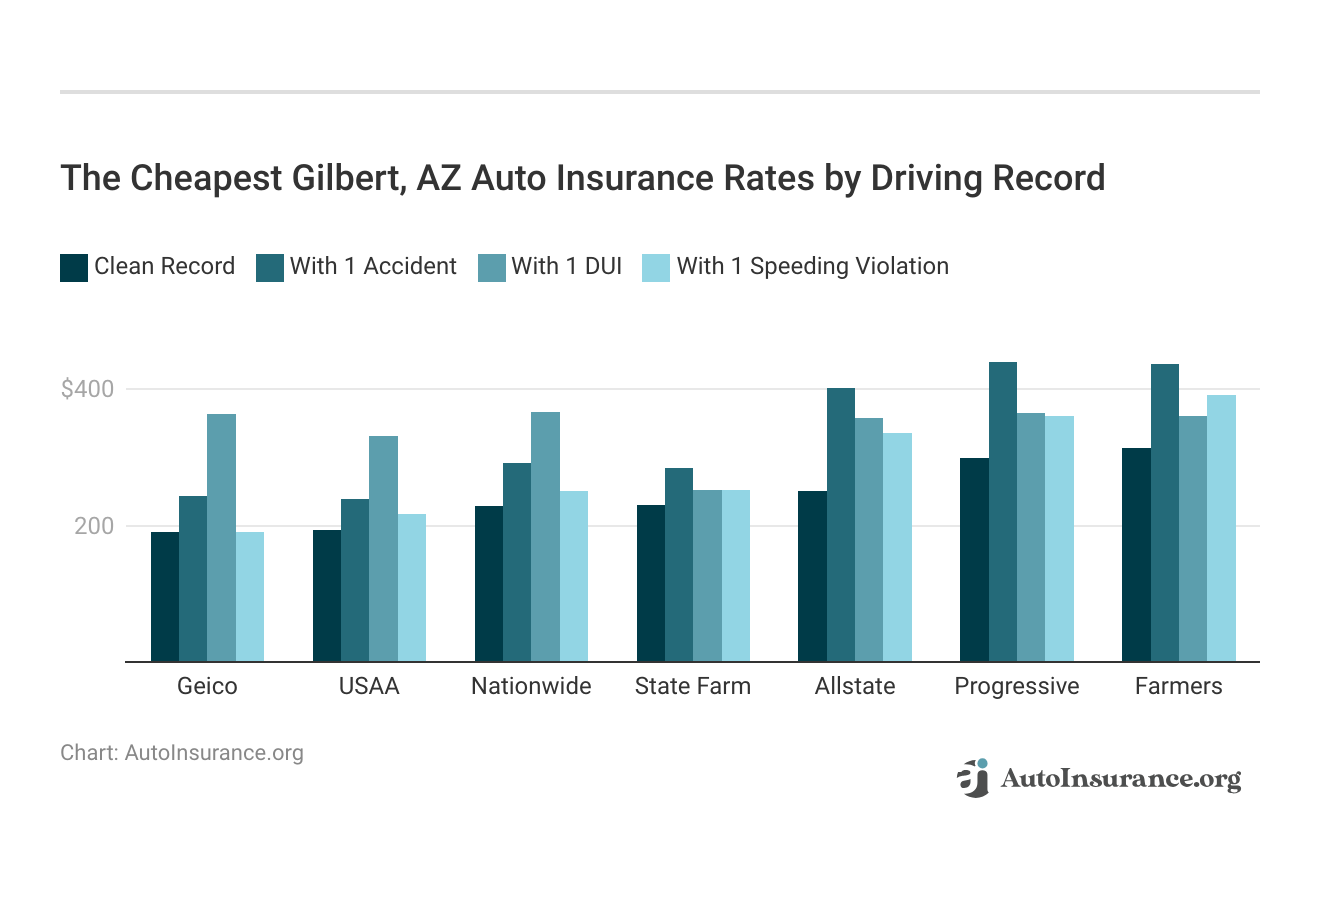 <h3>The Cheapest Gilbert, AZ Auto Insurance Rates by Driving Record</h3>